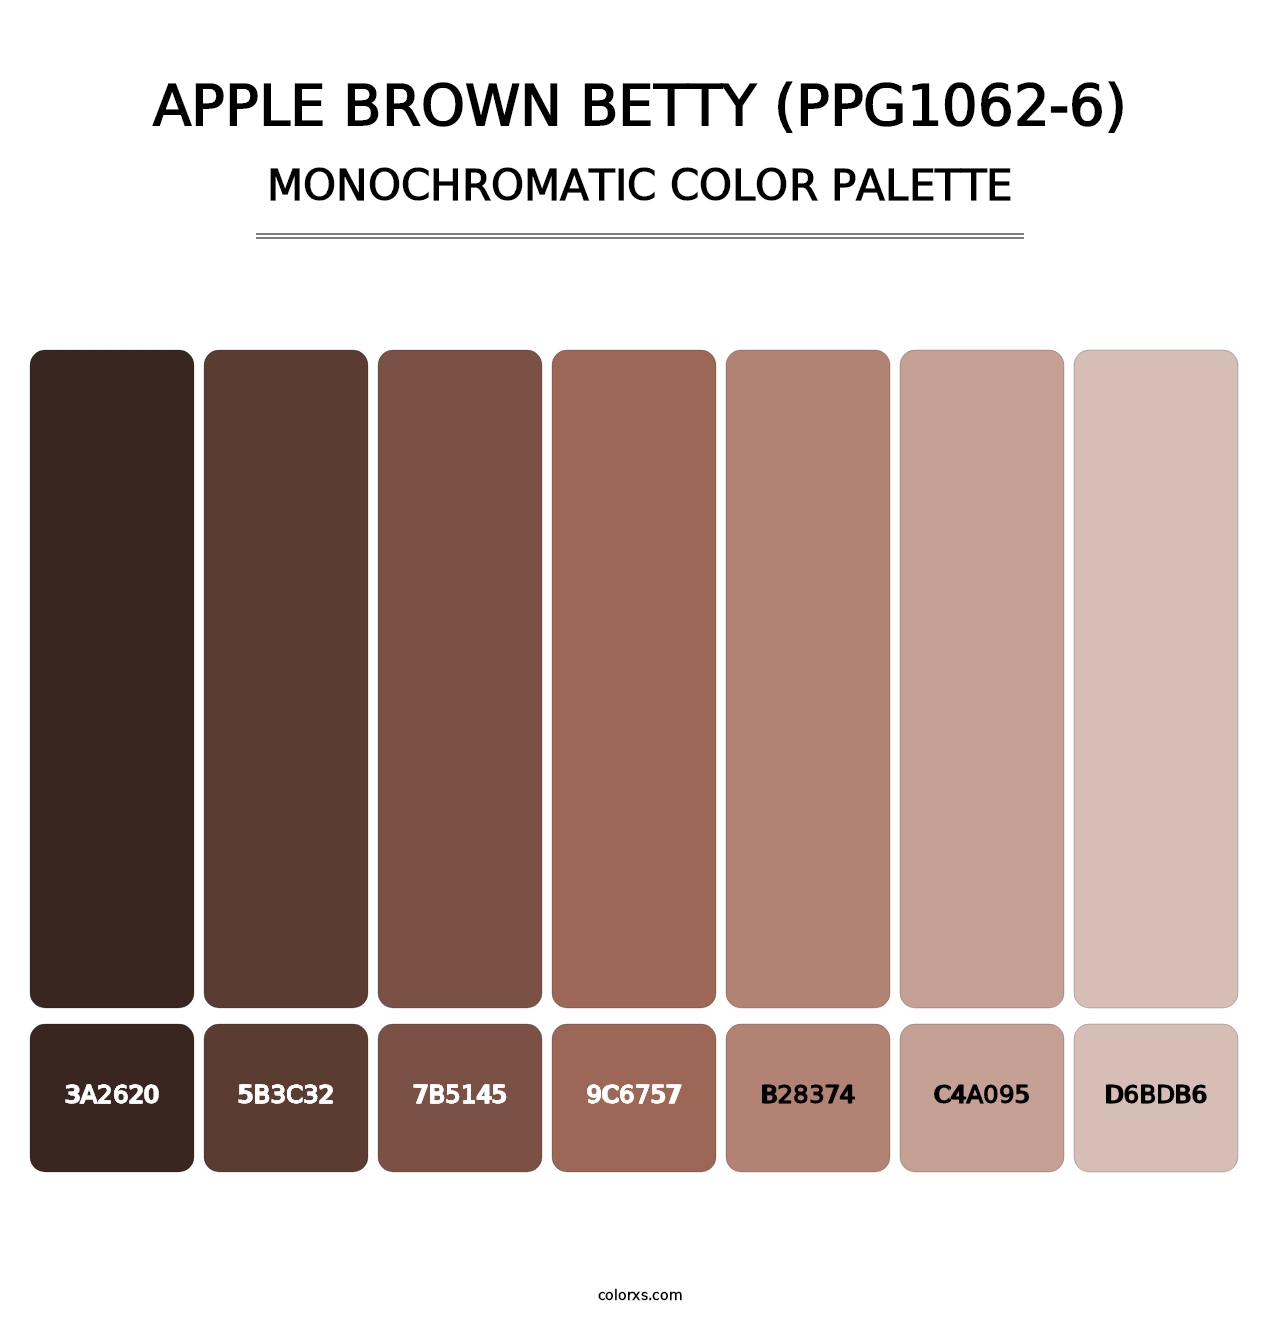 Apple Brown Betty (PPG1062-6) - Monochromatic Color Palette